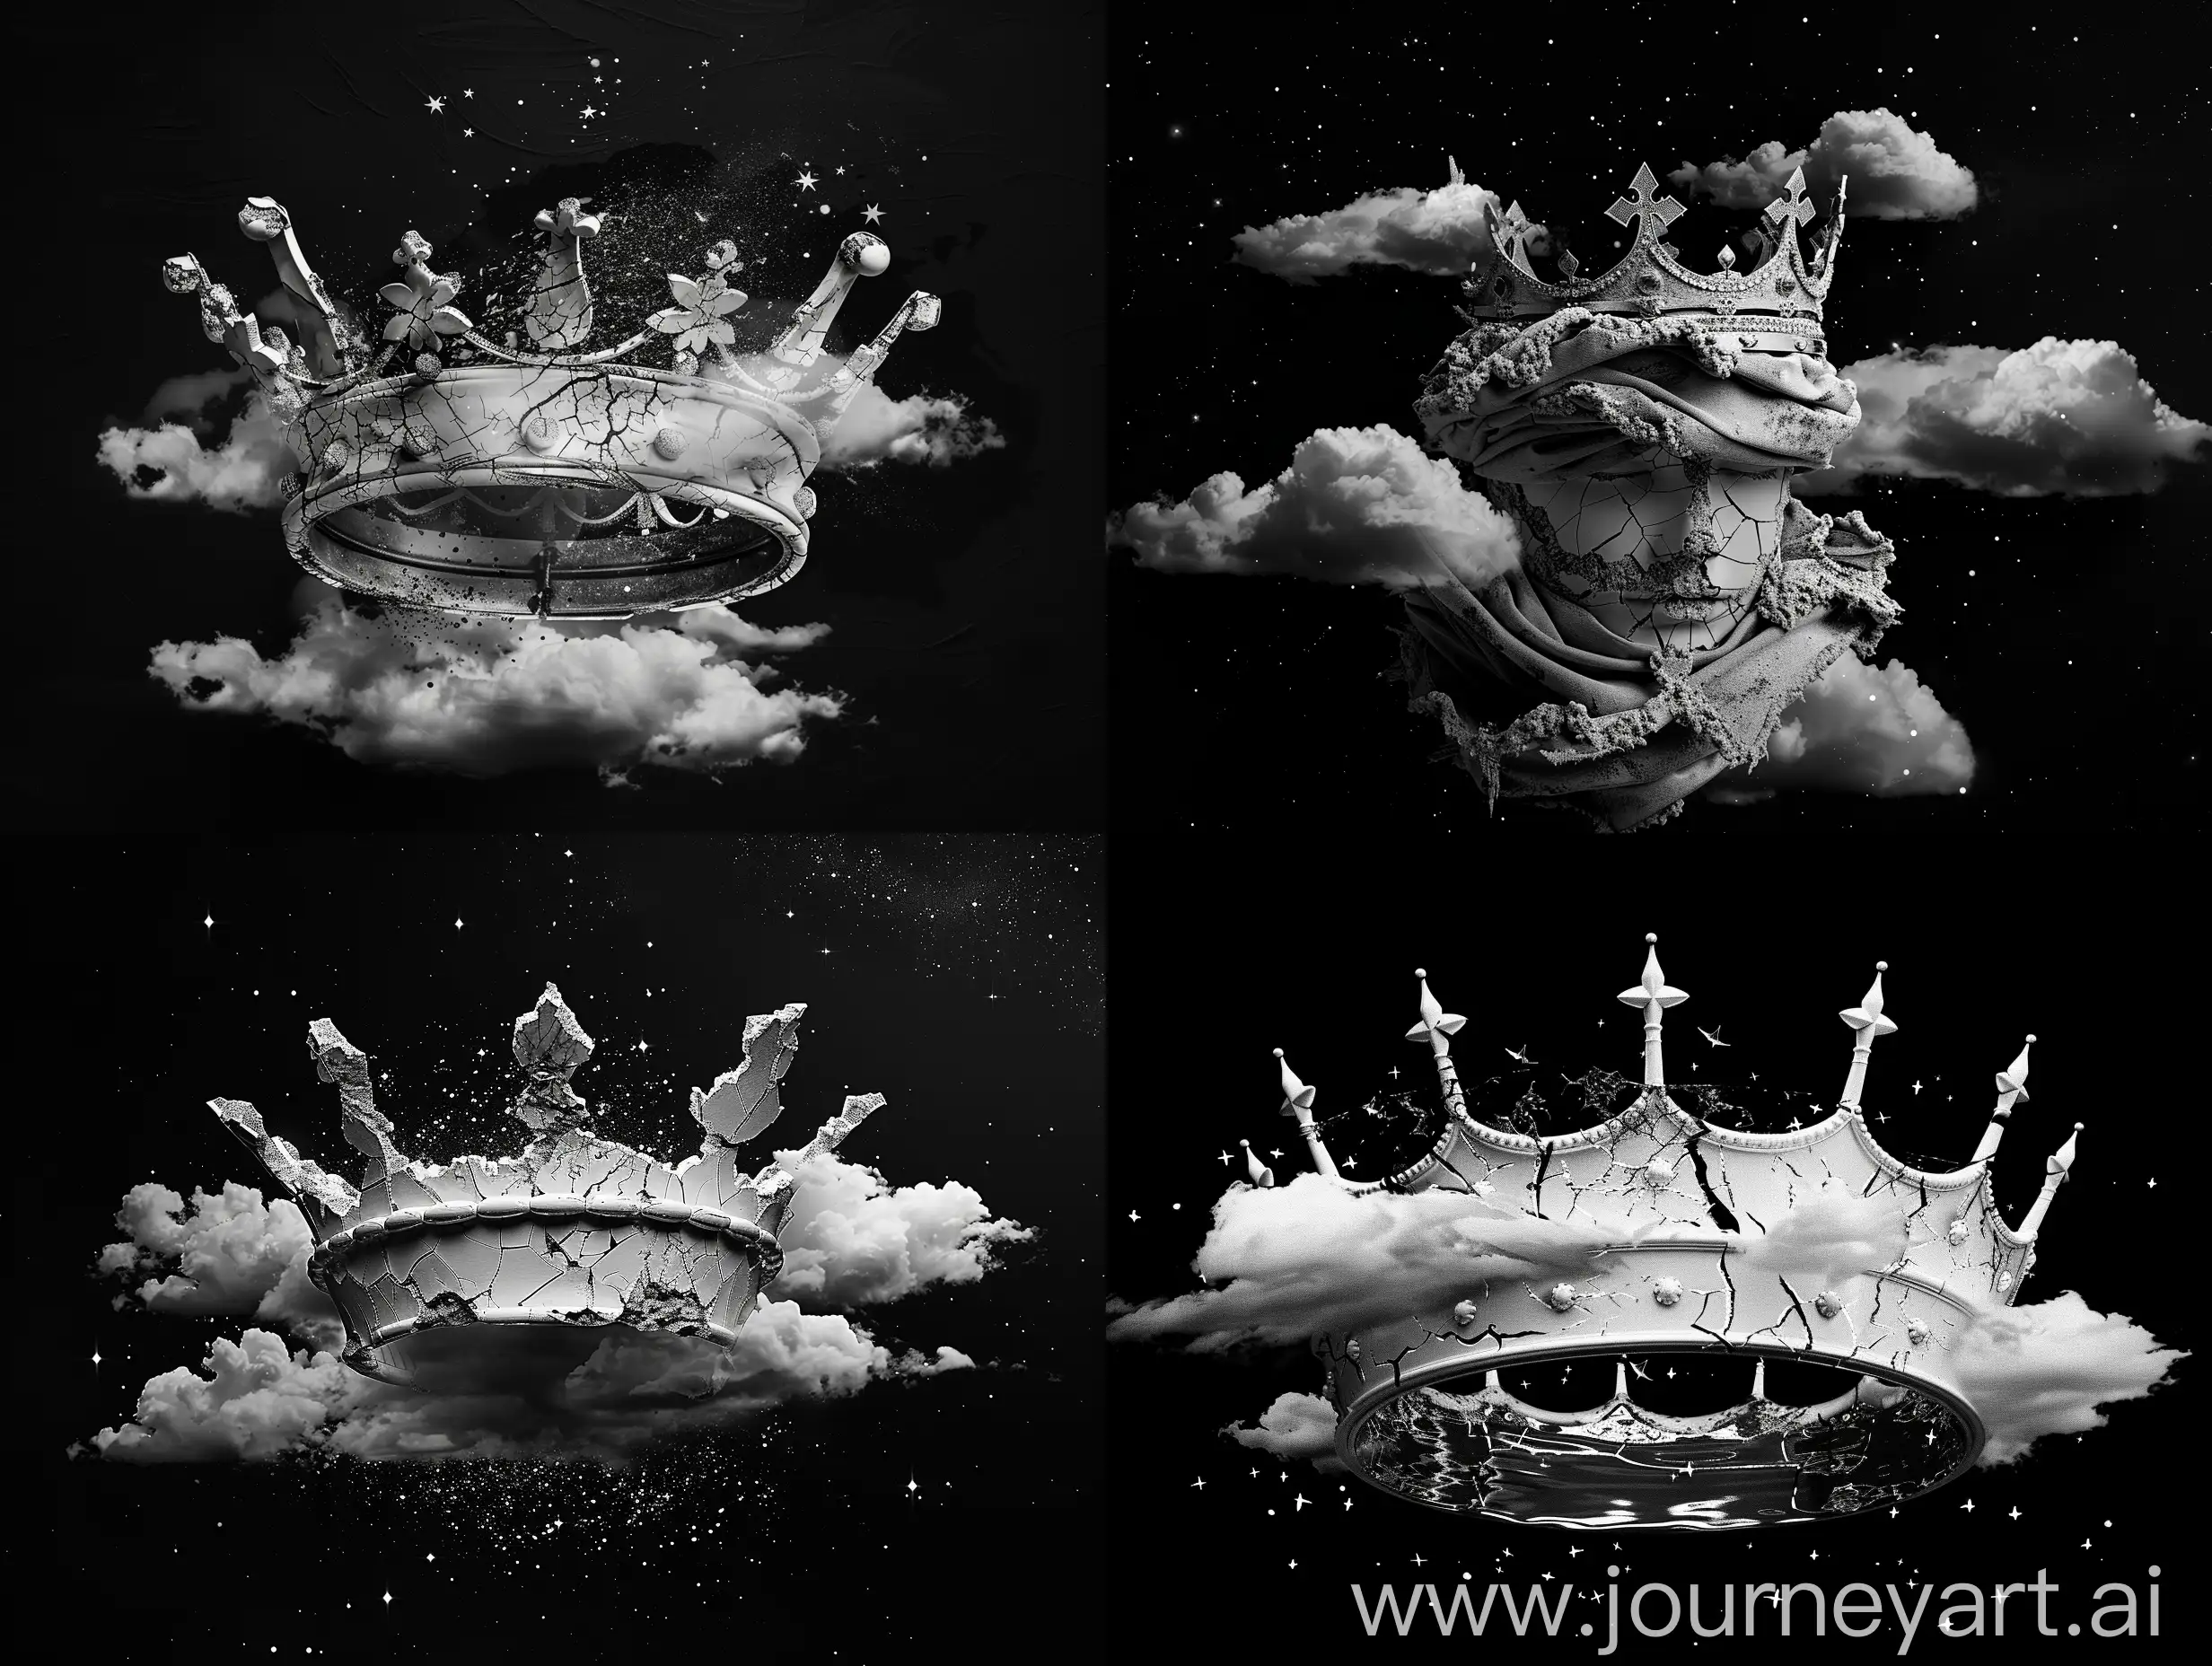 Minimalistic-Black-and-White-Cracked-Queens-Crown-with-Ominous-Clouds-and-Stars